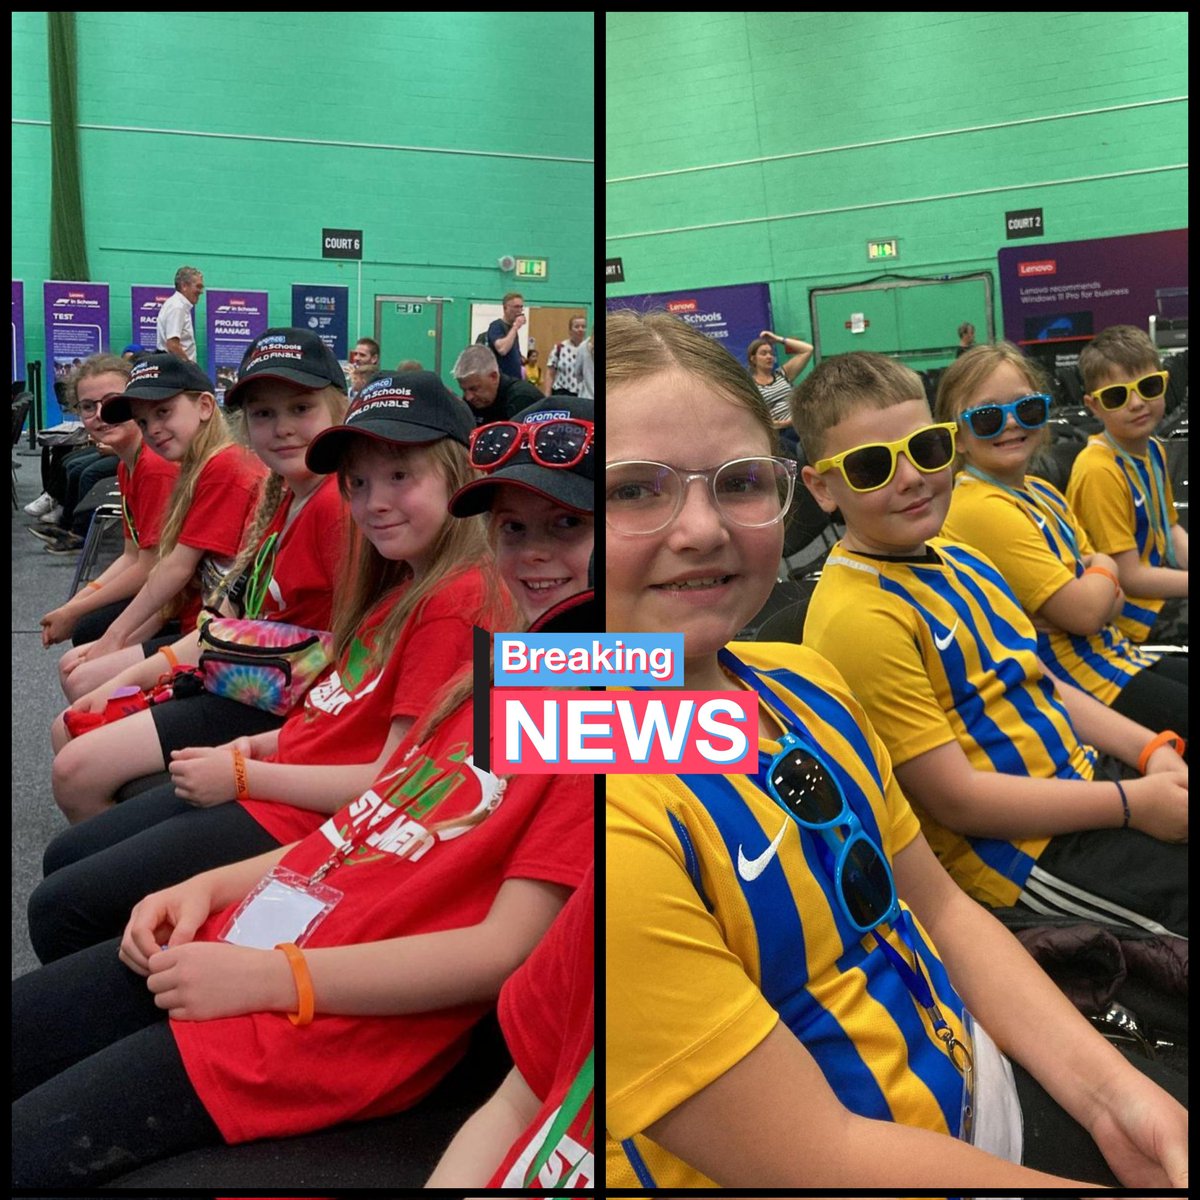 @garntegprimary We made it to the opening ceremony @f1inschoolsUK @EESWSTEMCymru @torfaencouncil @EAS_ProfLearn @STEMLearningUK we are so excited #notinmissout